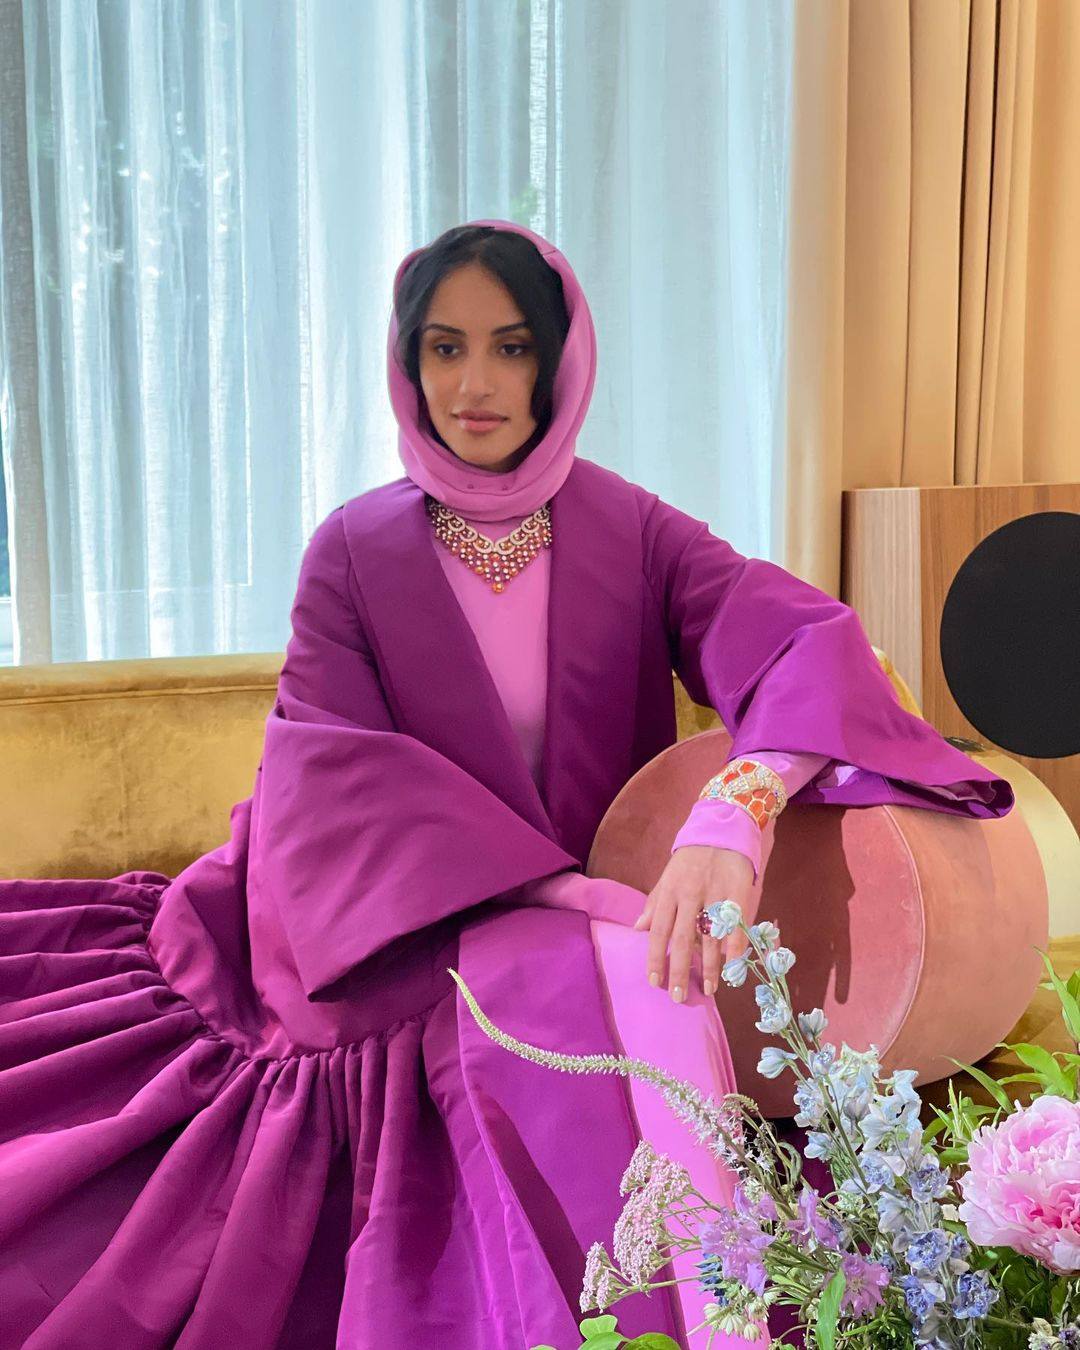 Princess Loulwa is a Saudi royal who is helping her kingdom thrive, through promoting entrepreneurship as well as local design and fashion. Photo: @loulwaymf/Instagram